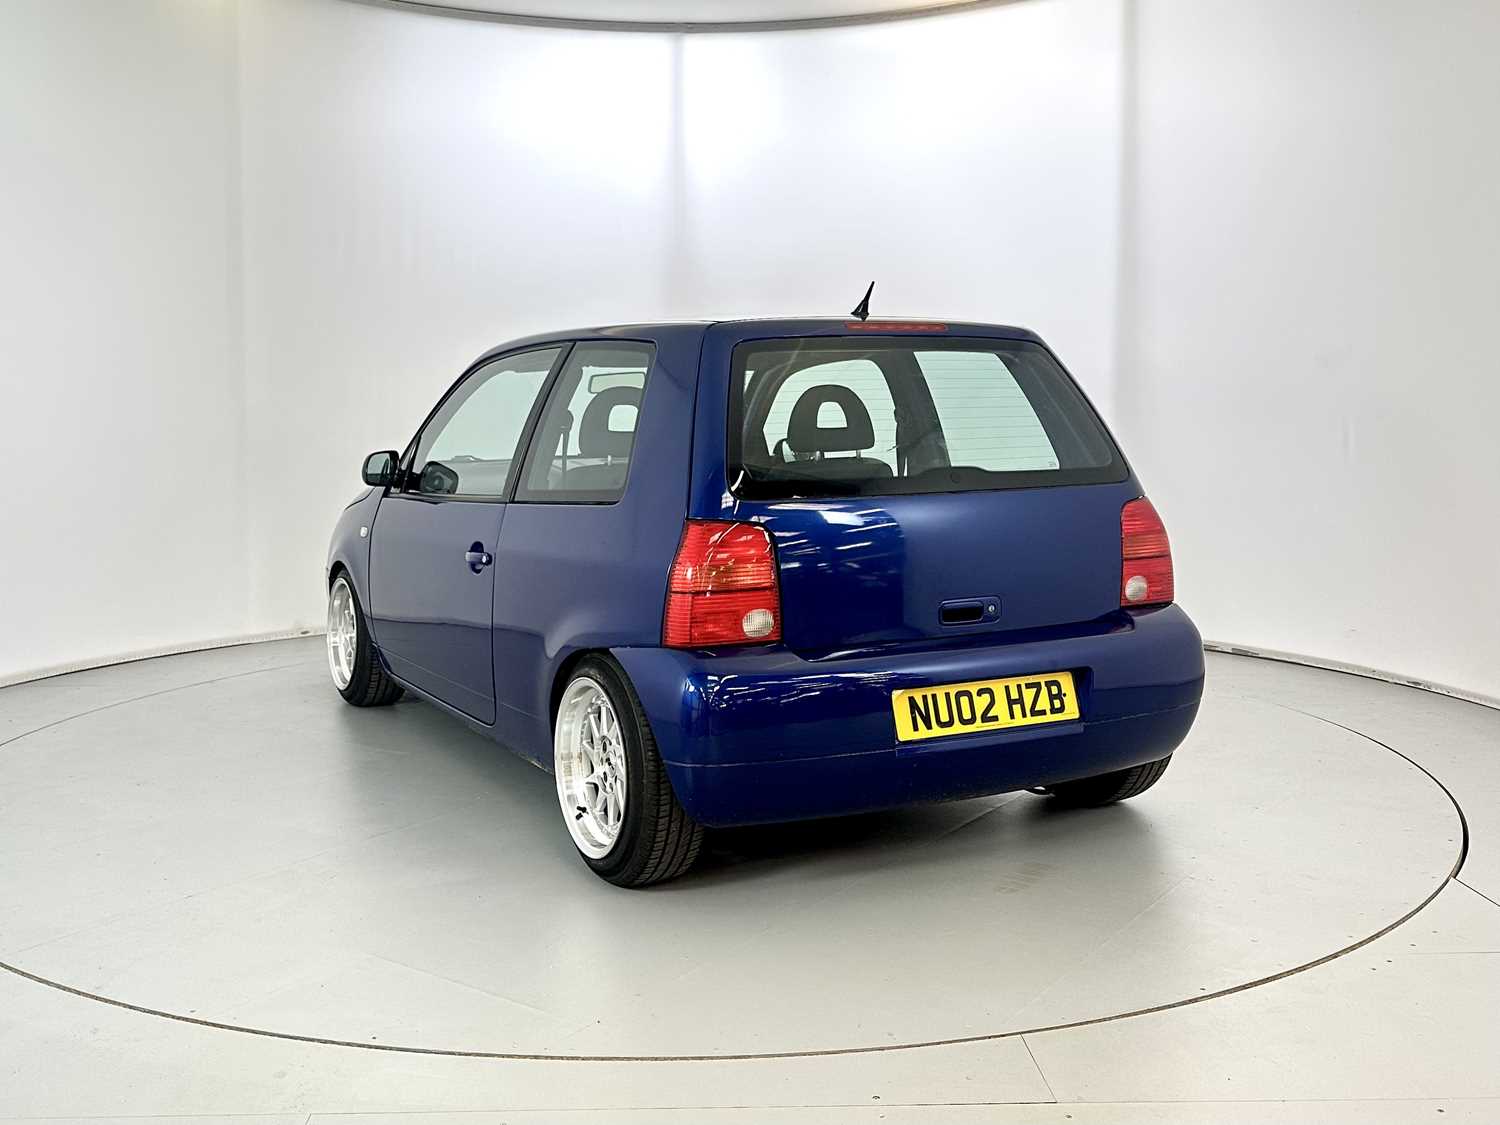 2002 Volkswagen Lupo - Image 7 of 28